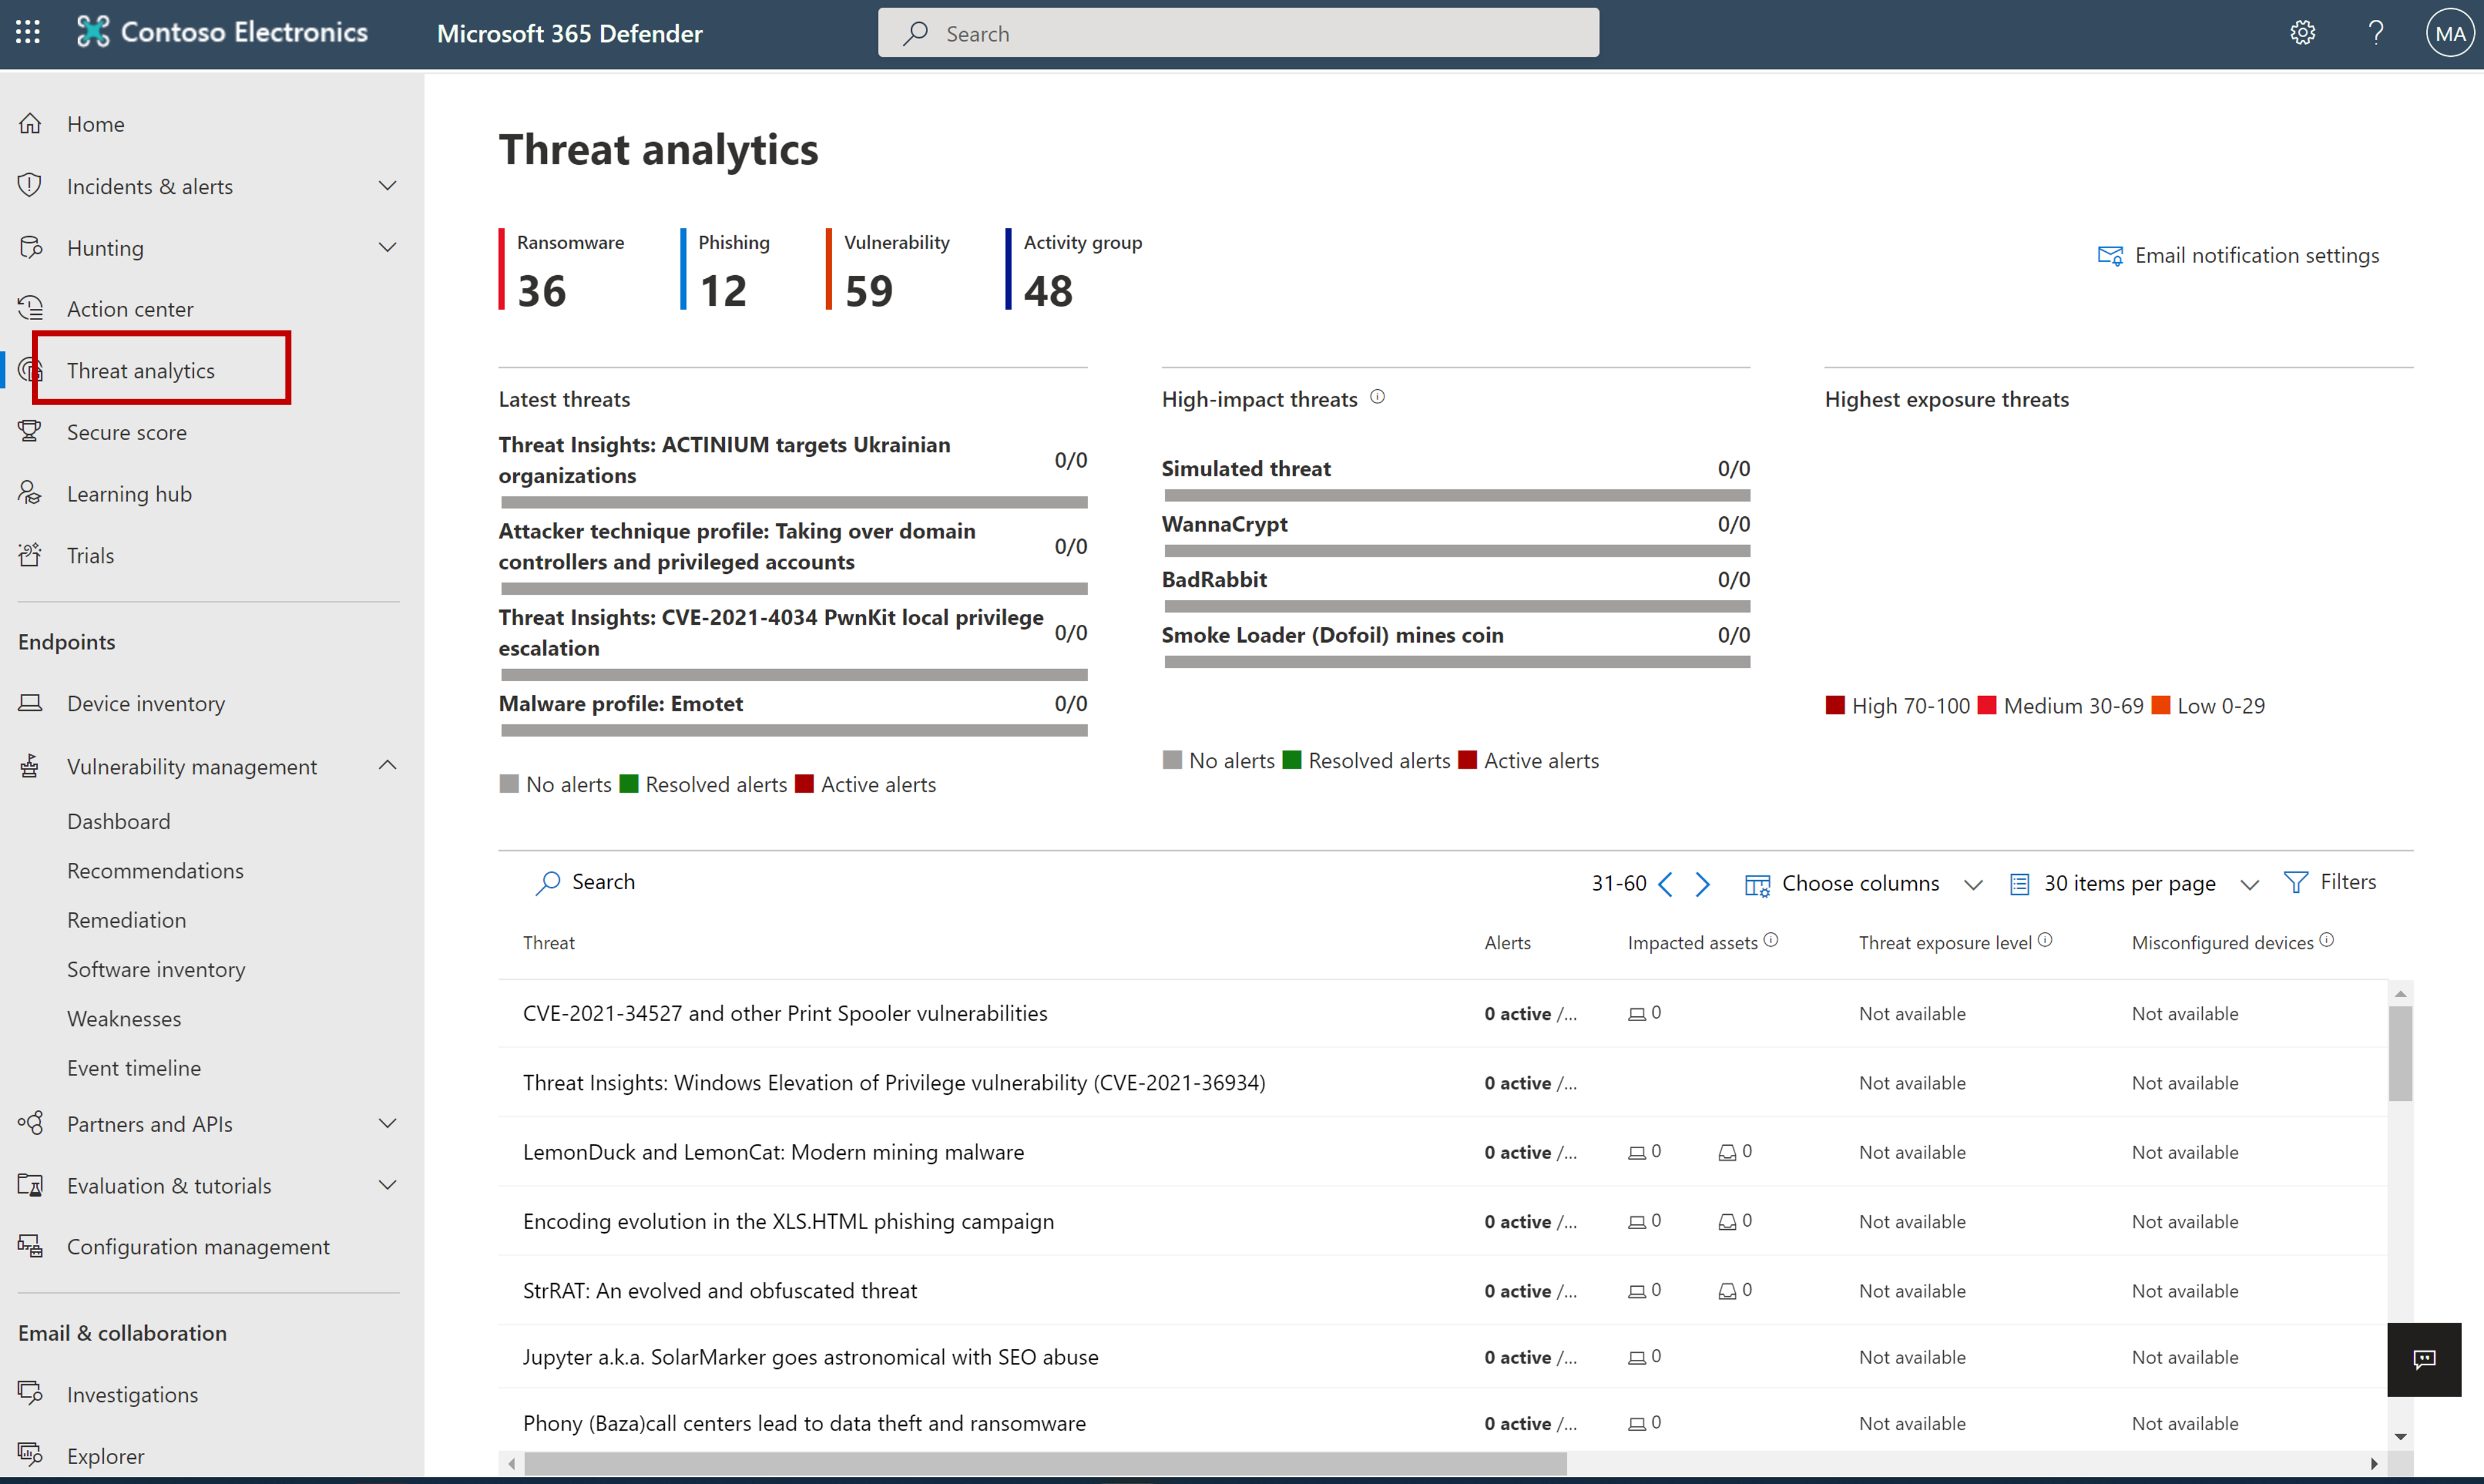 Screenshot showing the threat analytics page.